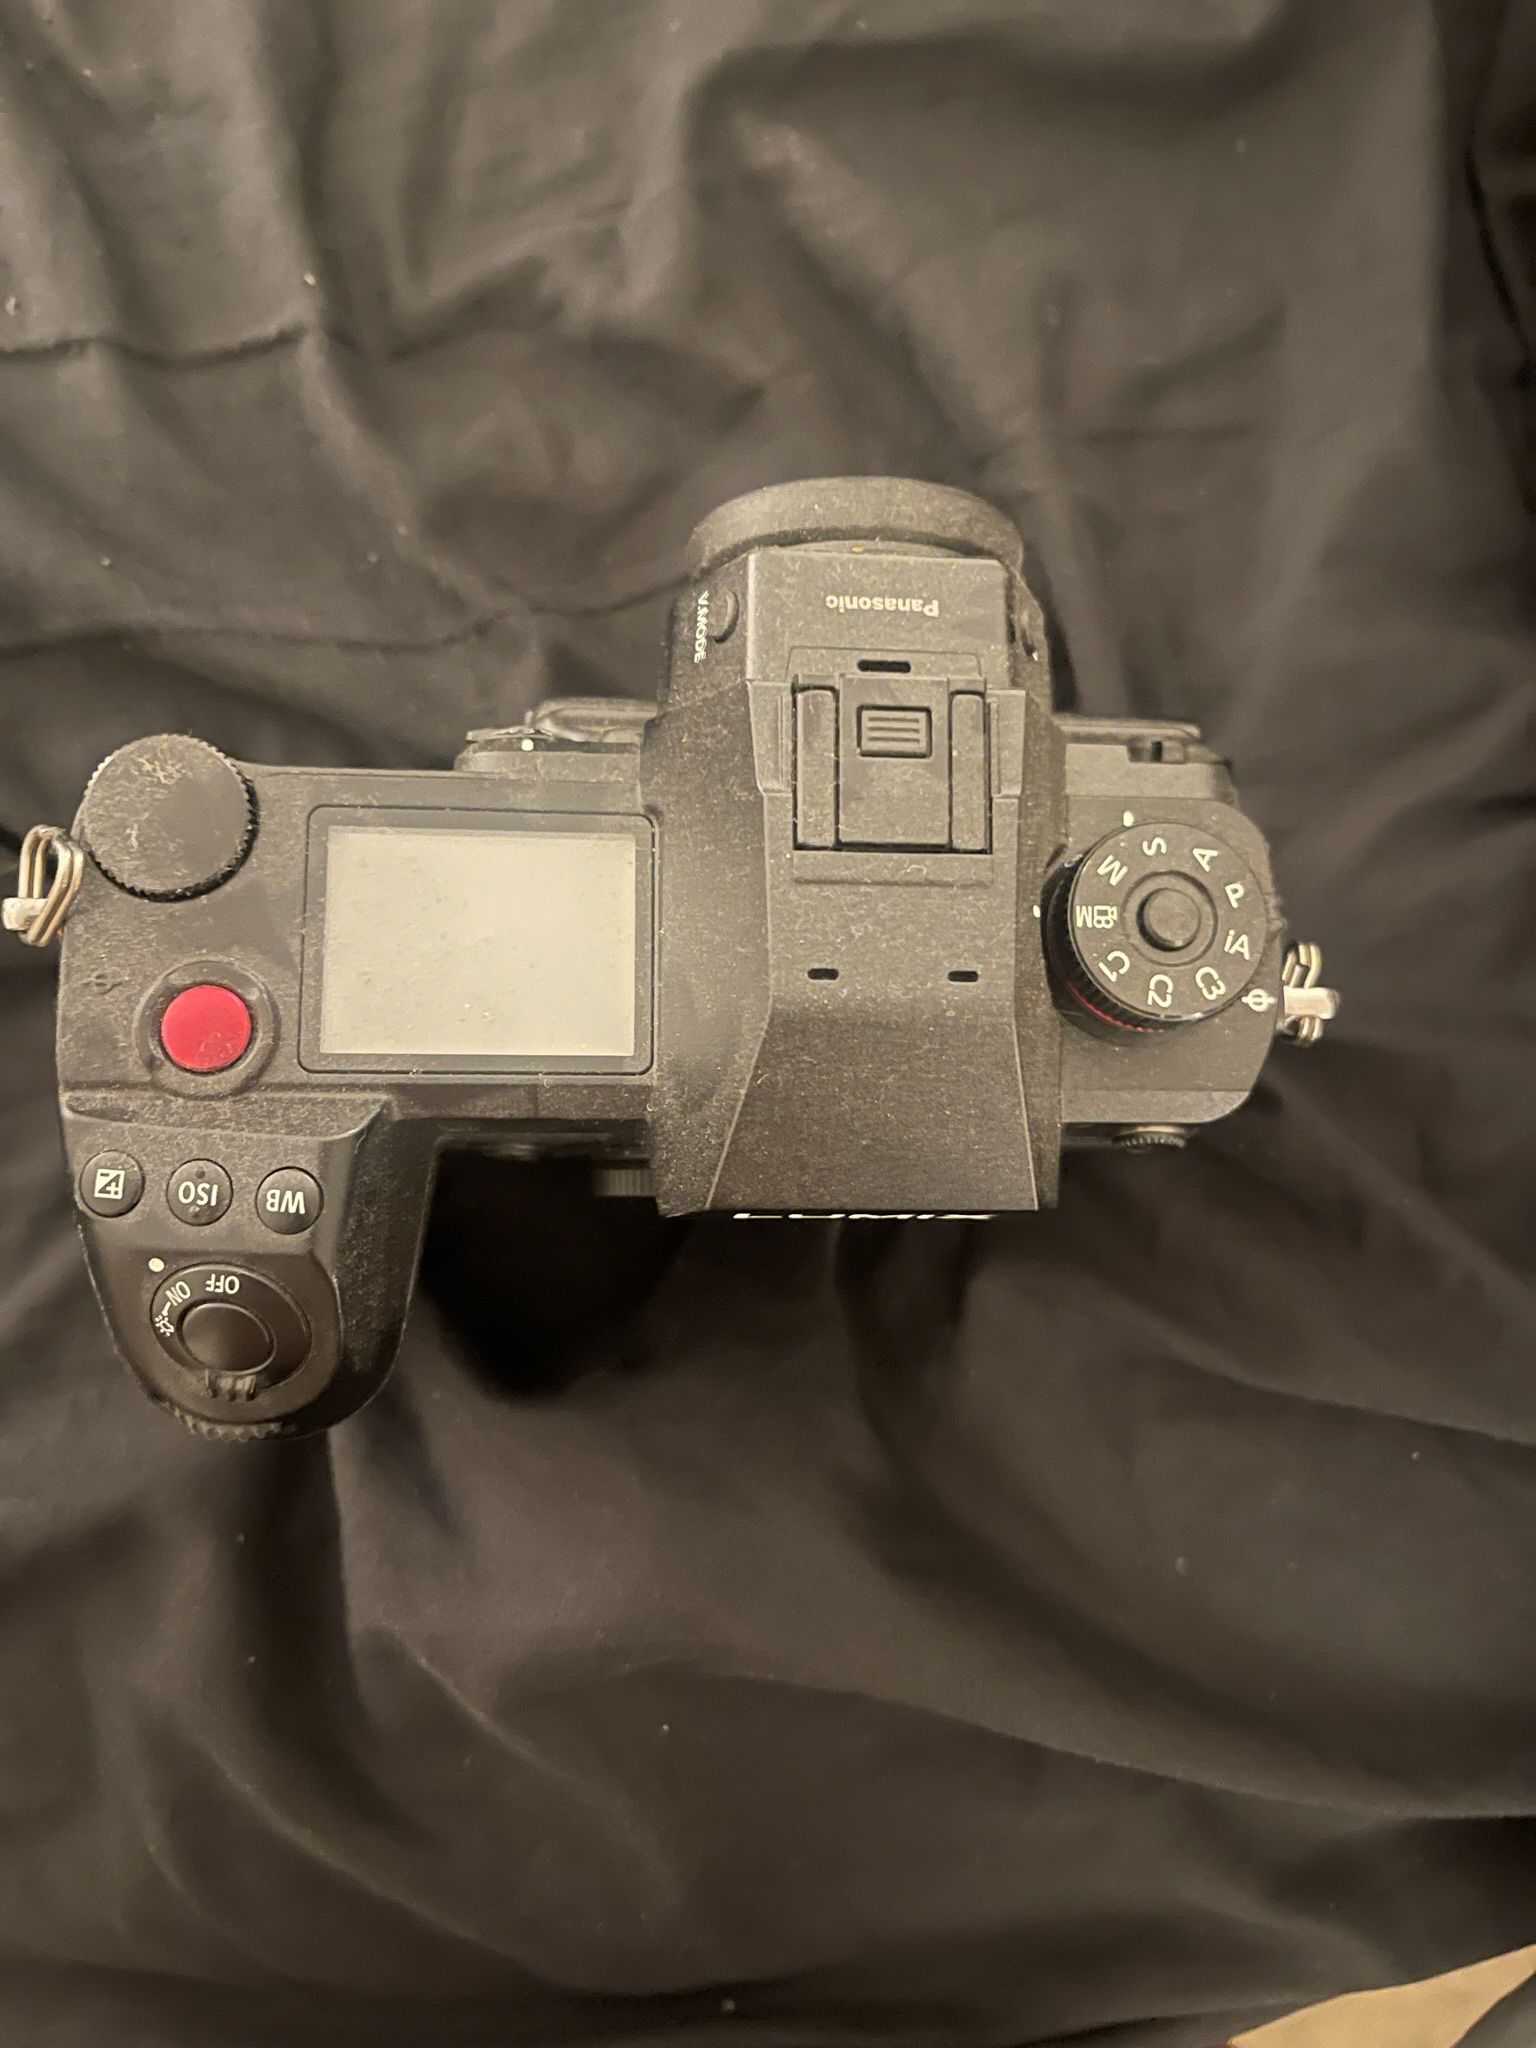 Lumix s1 h  local pickup only 1,850 OBO